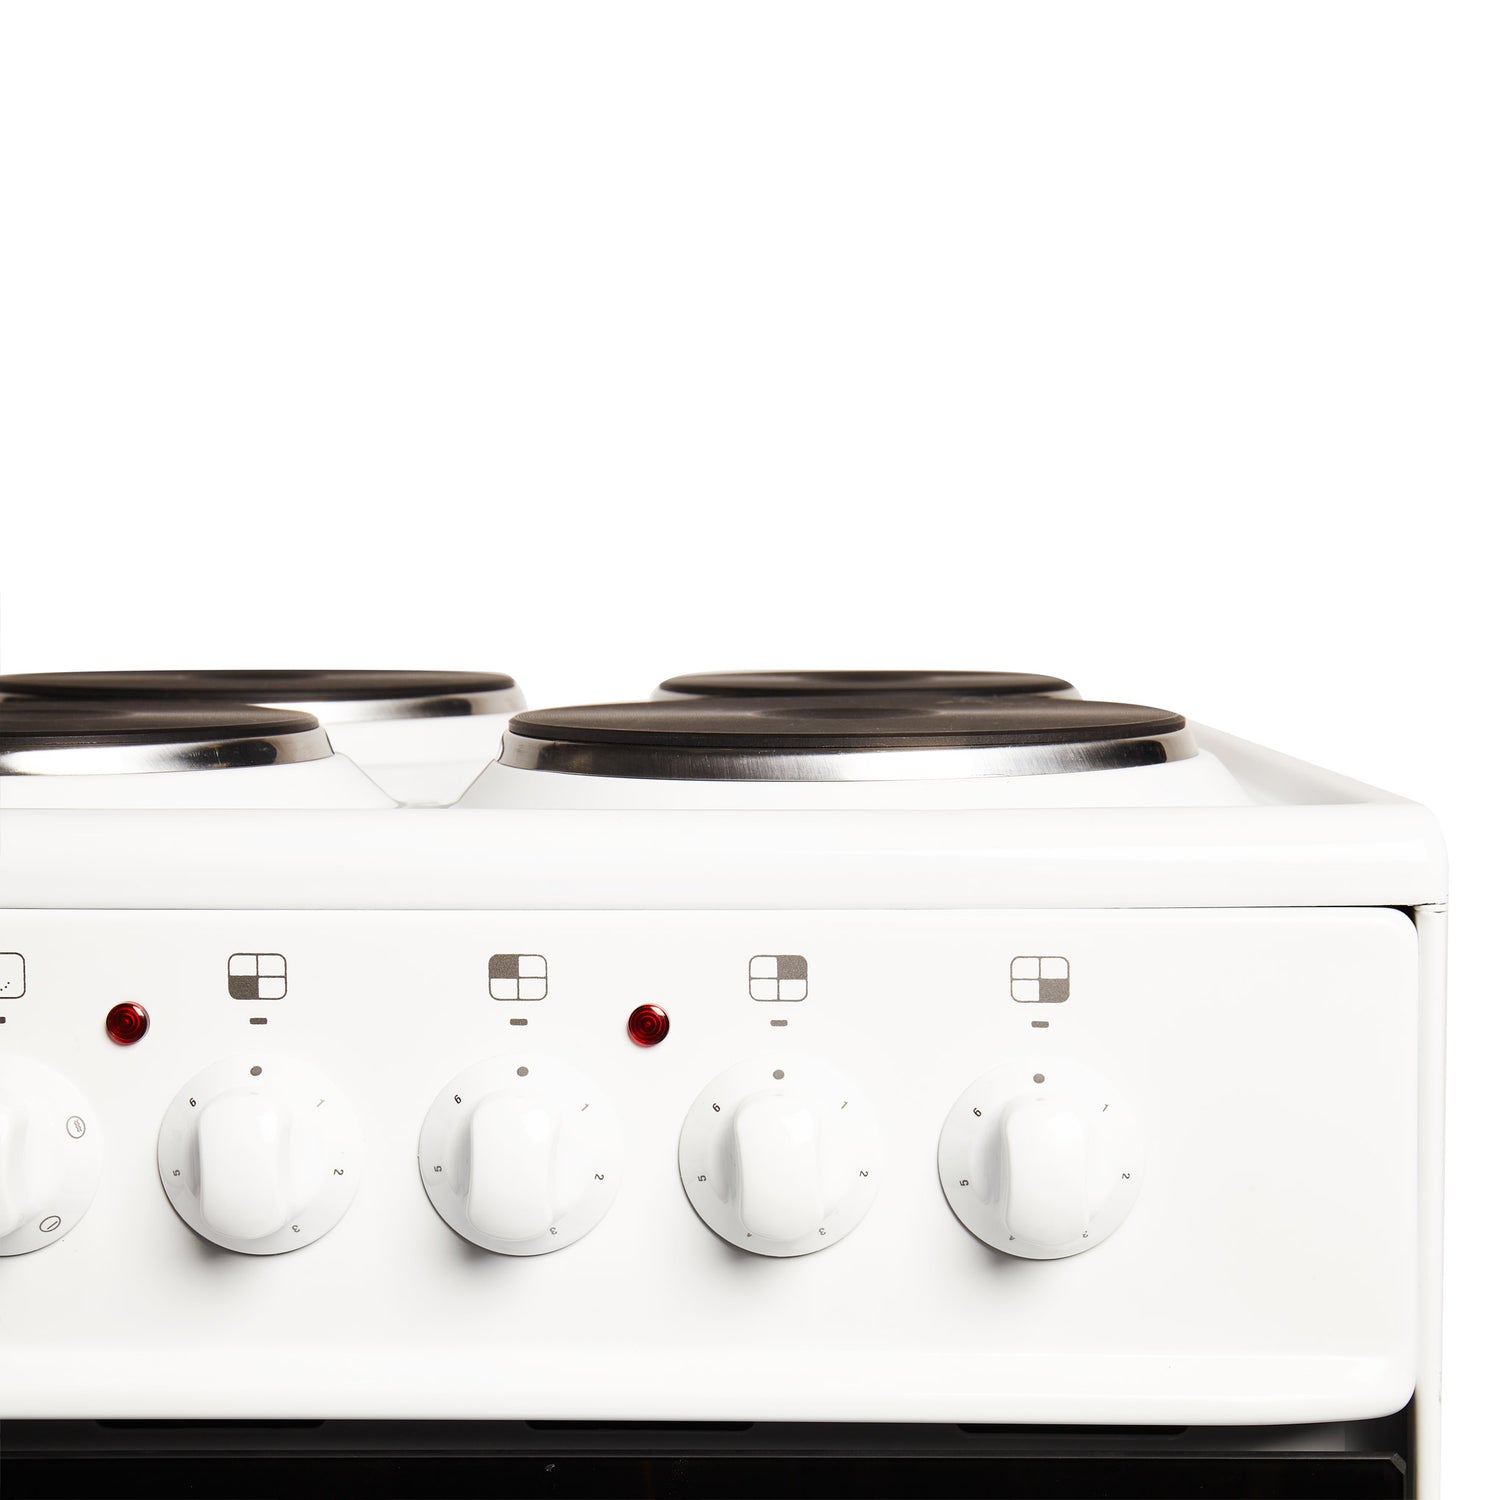 Electric Cookers